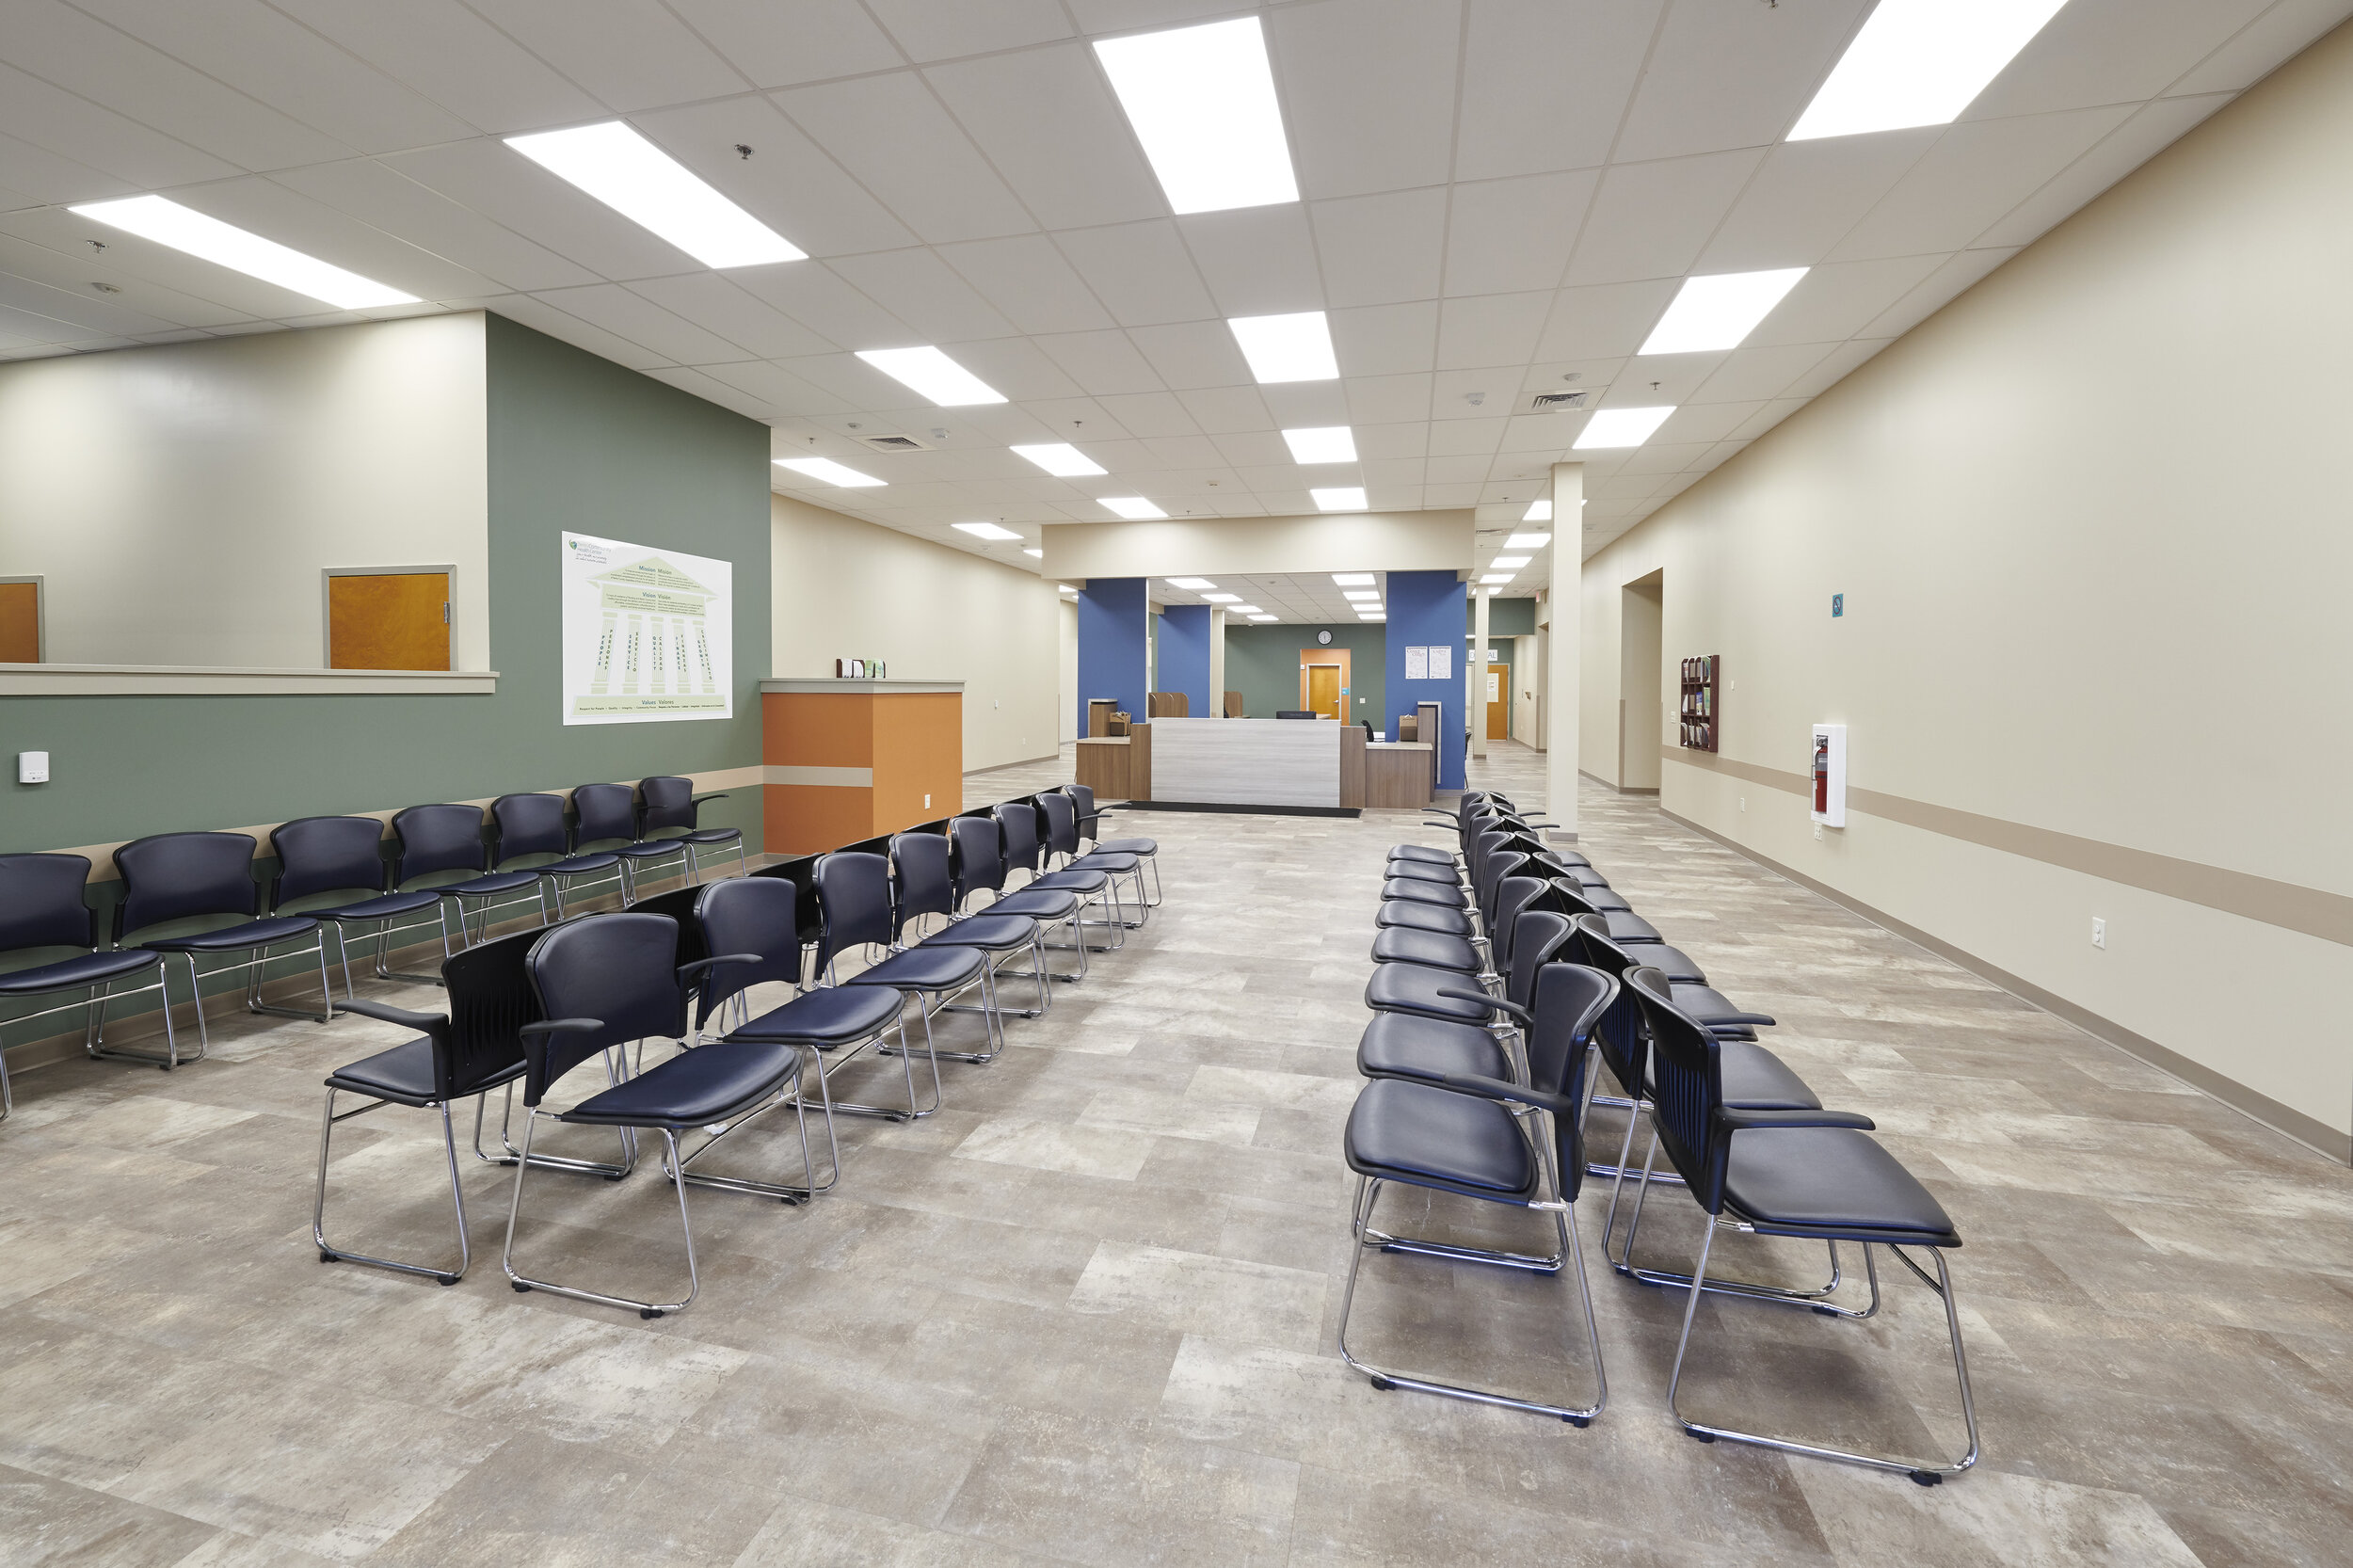 BCHC_Benchmark_Medical_Office_Fit-Out_Image_6.jpg.JPG